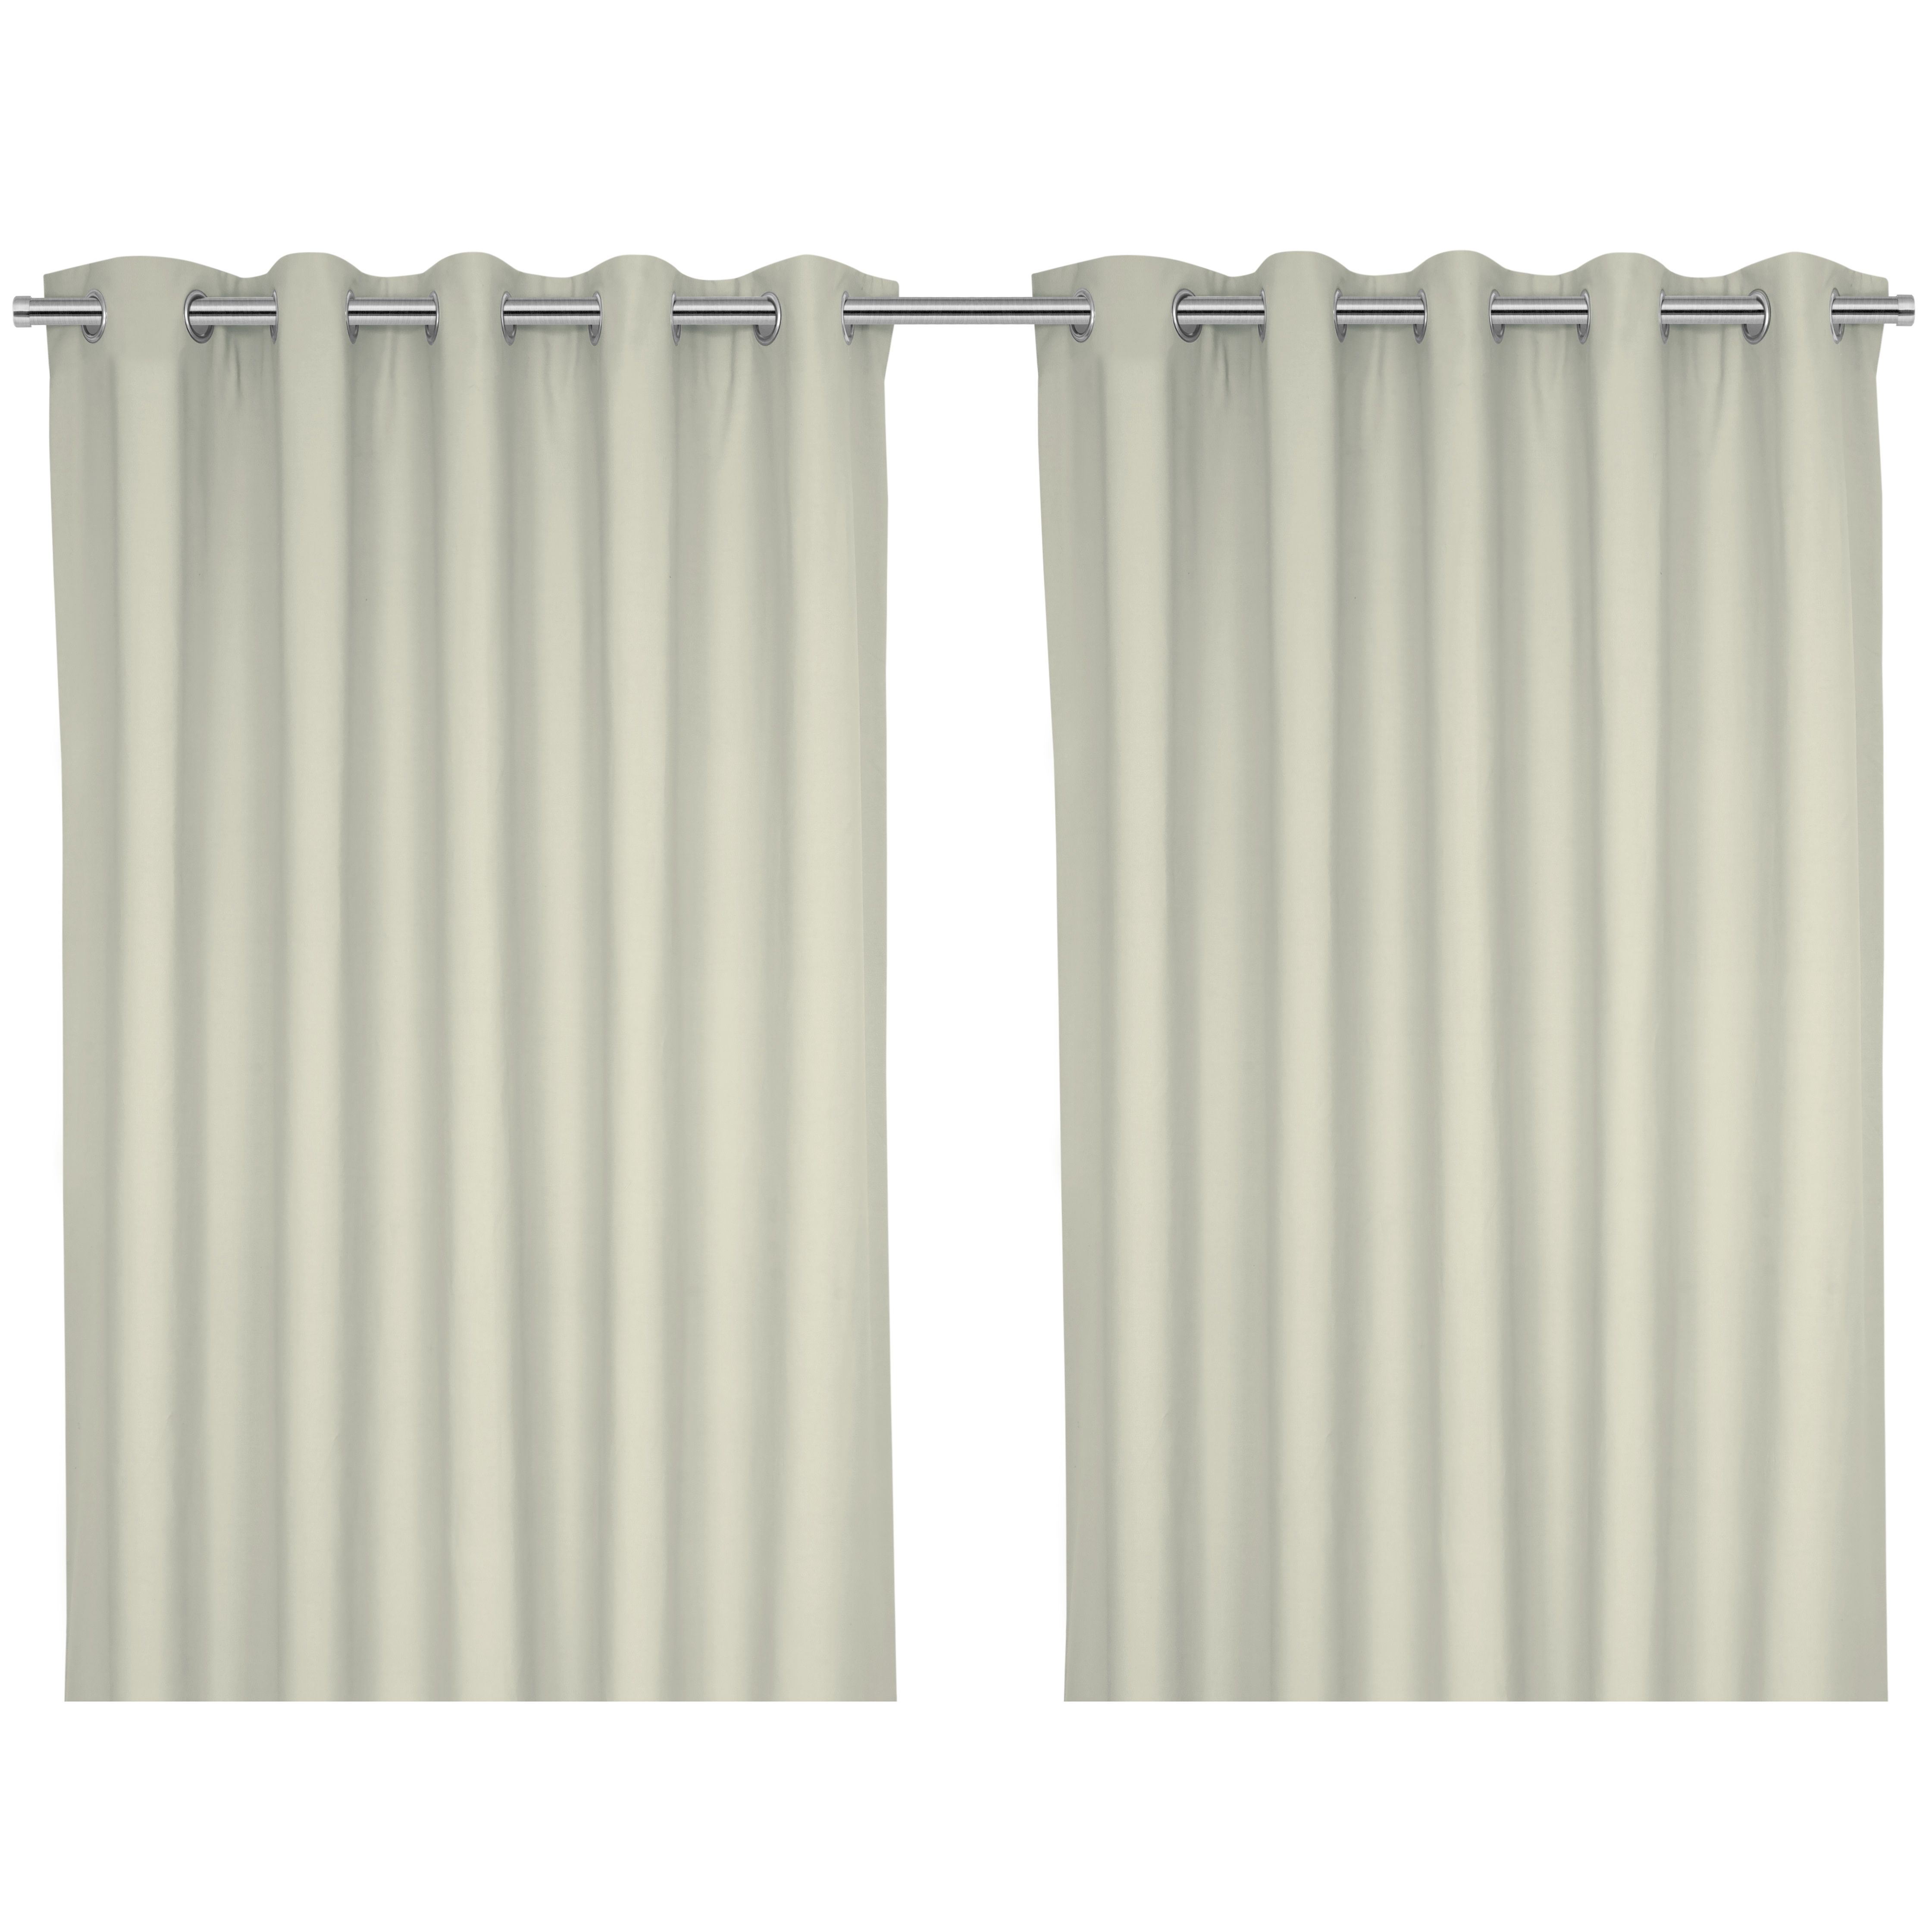 Hiva Beige Solid dyed Lined Eyelet Curtain (W)117cm (L)137cm, Pair